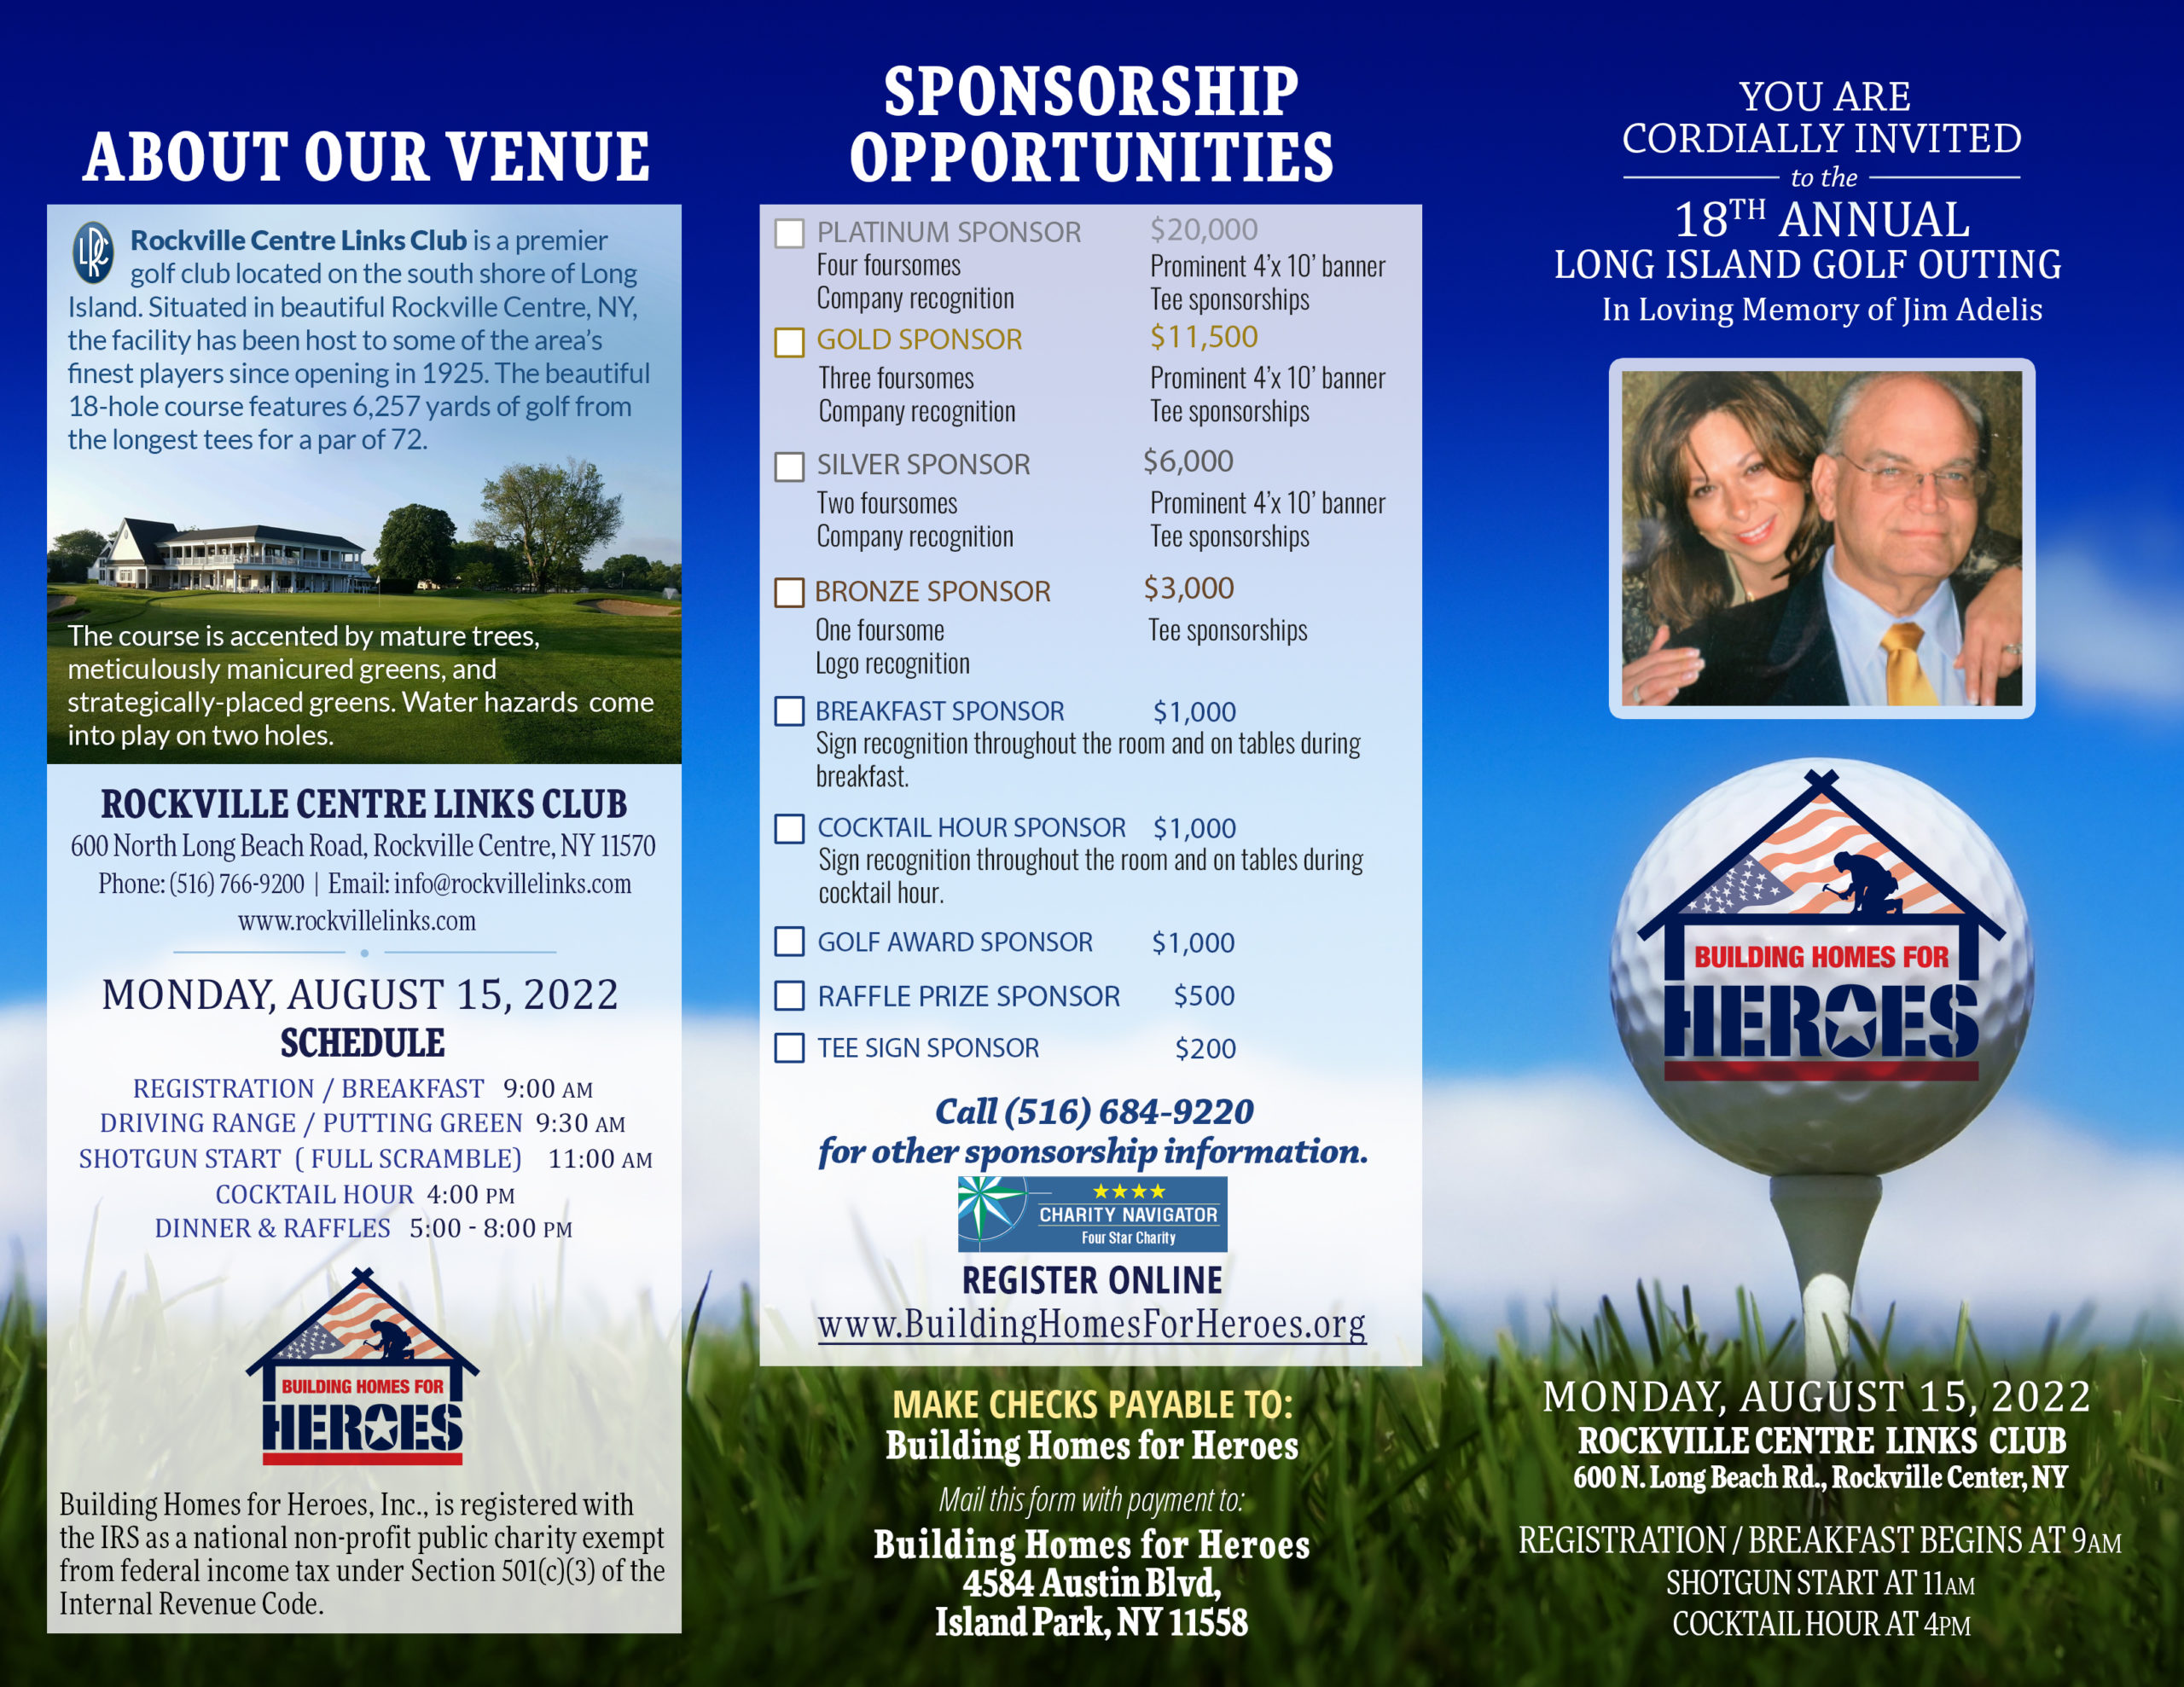 18th Annual Long Island Golf Outing @ Rockville Centre Links Club